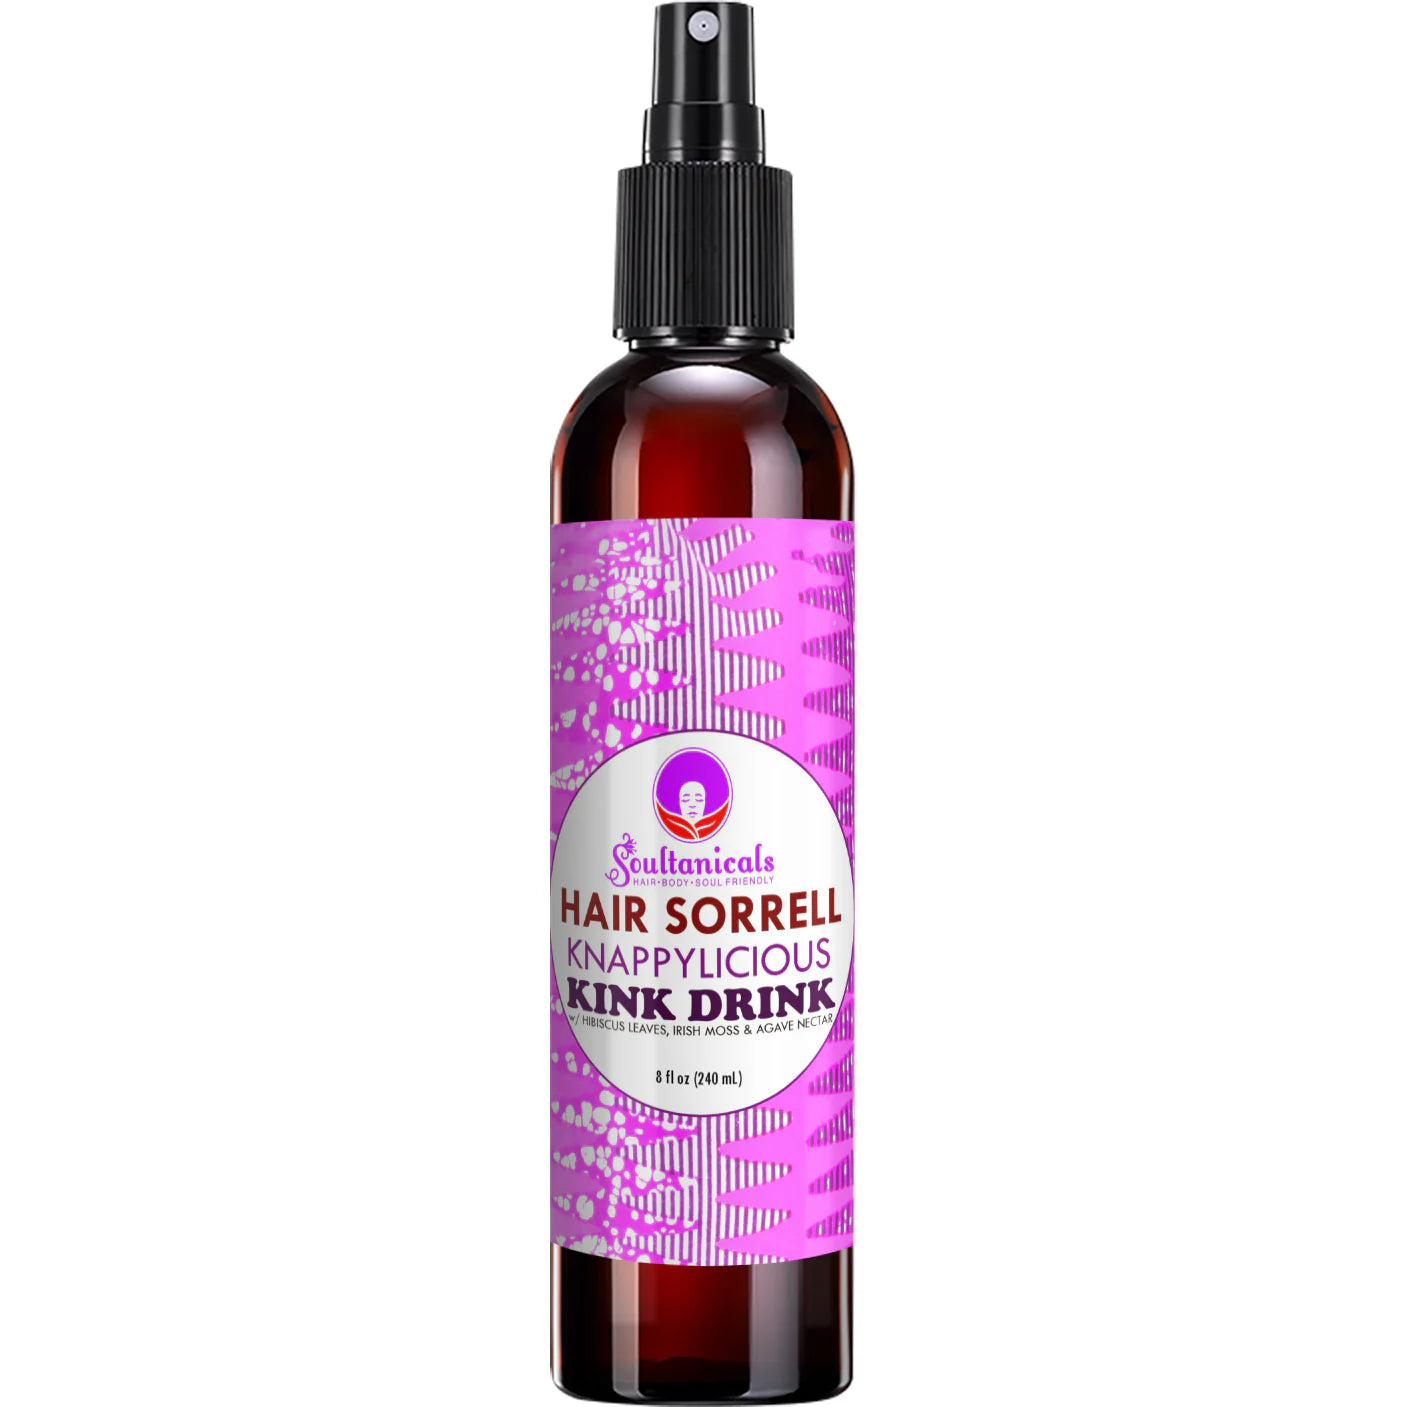 SOULTANICALS -HAIR SORRELL- KNAPPYLICIOUS KINK DRINK 8oz